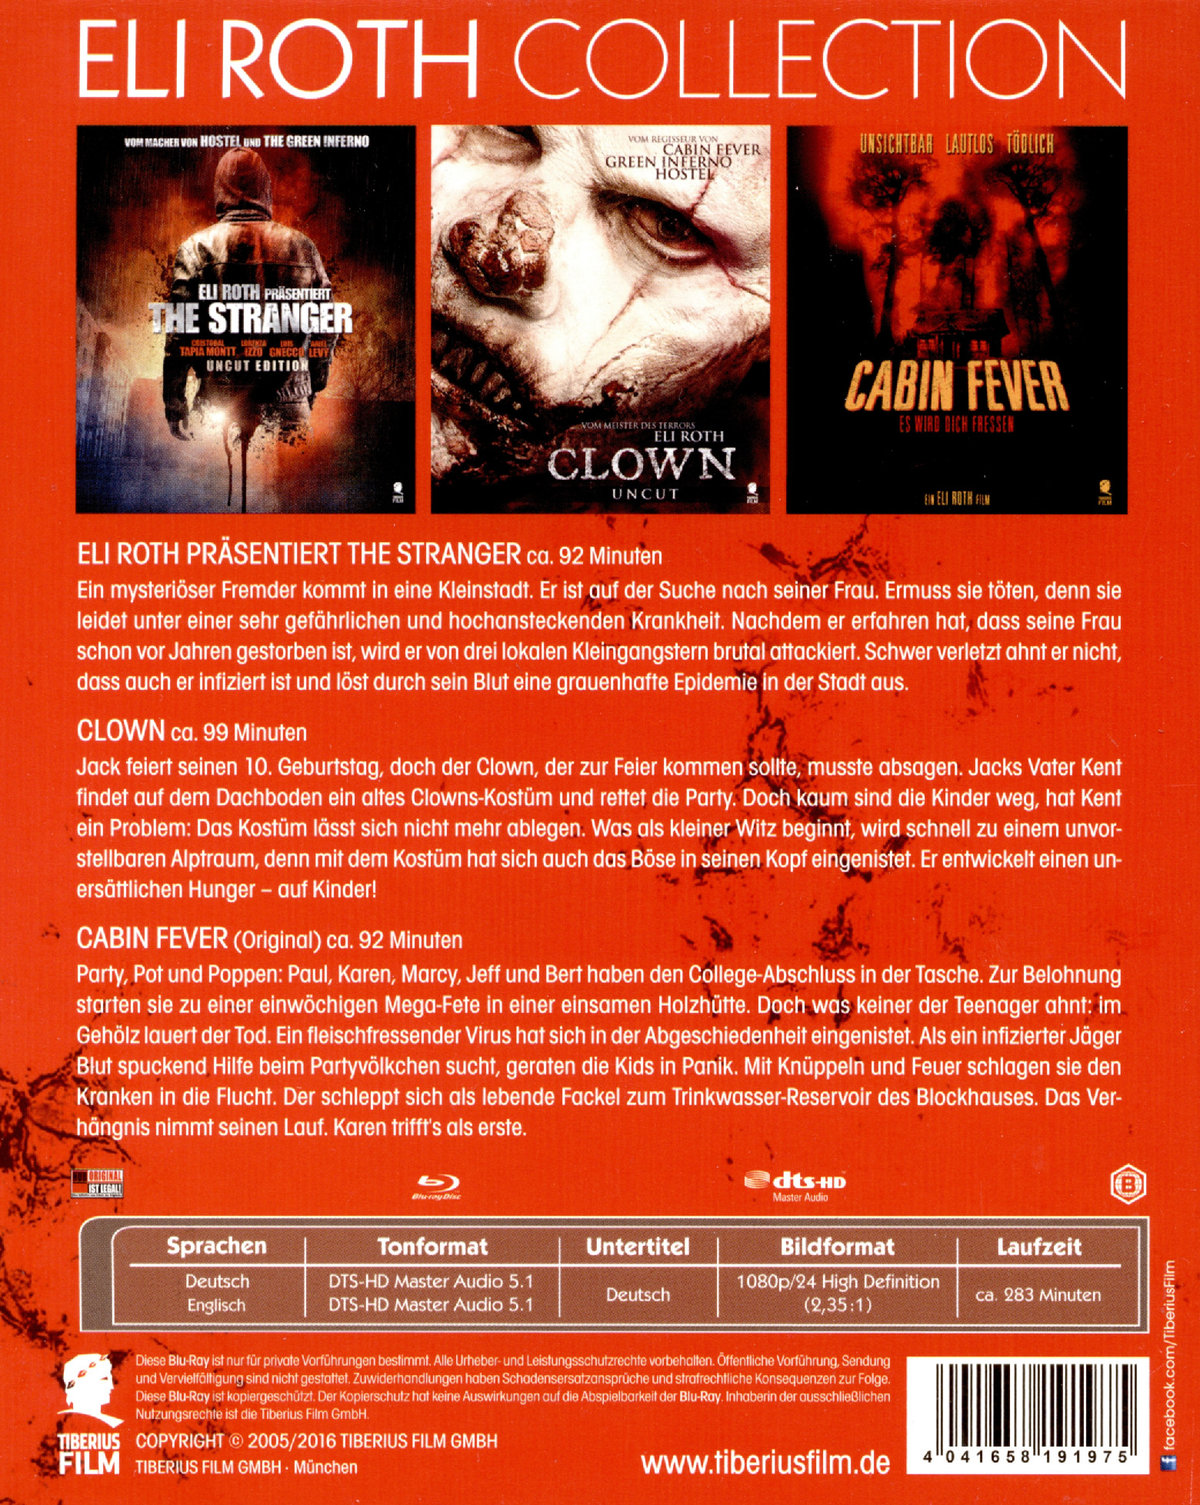 Eli Roth Collection - Uncut Edition (blu-ray)